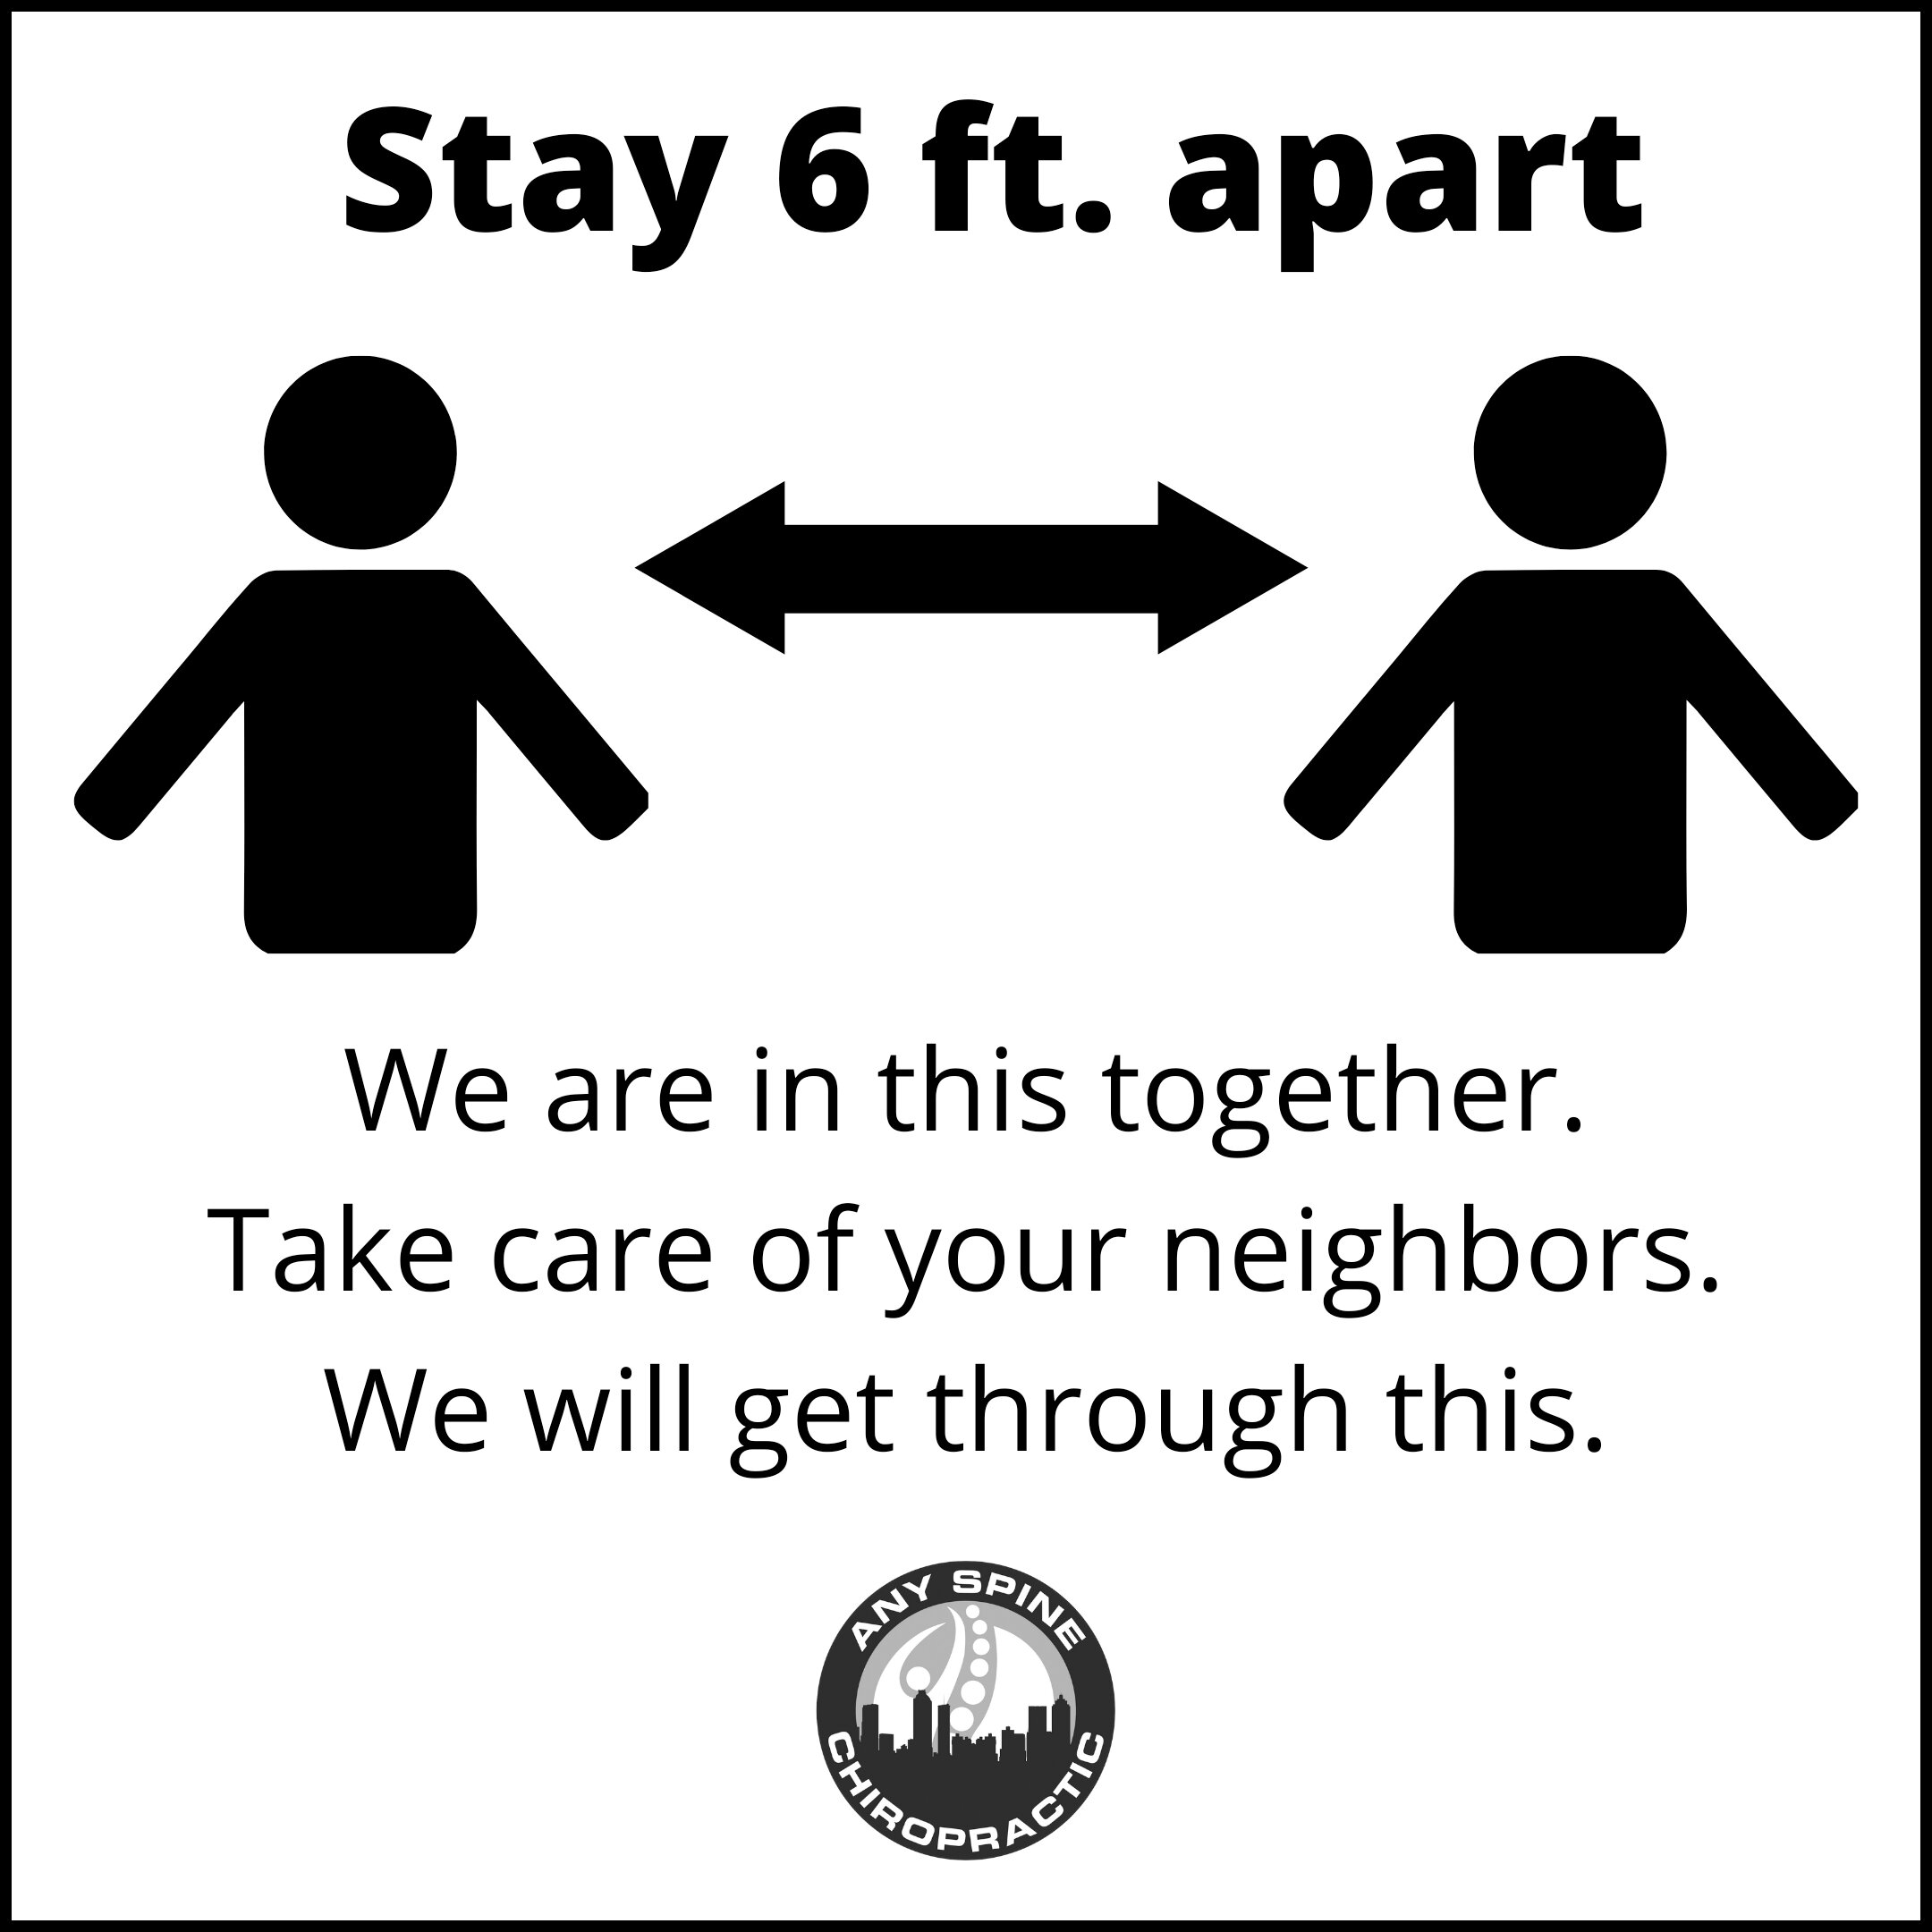 Stay 6ft. apart. We are in this together. Take care of your neighbors. We will get through this. Ad Campaign